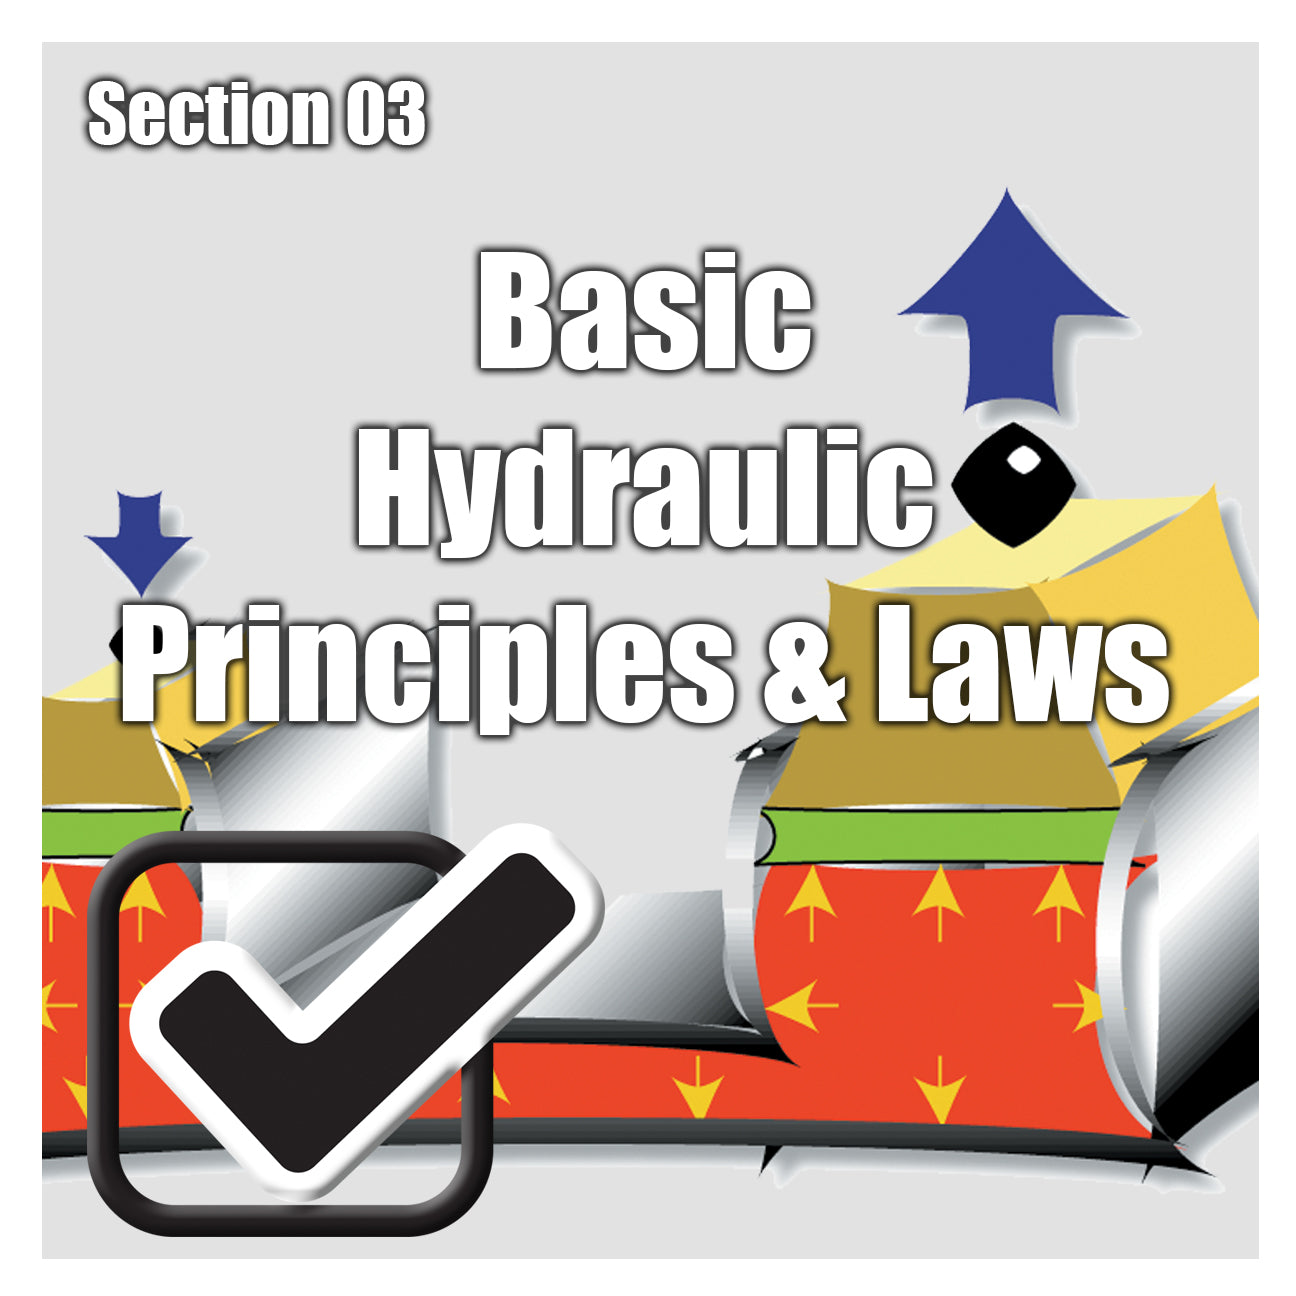 PH Section 03 - Basic Hydraulic Principles & Laws - Re-Test